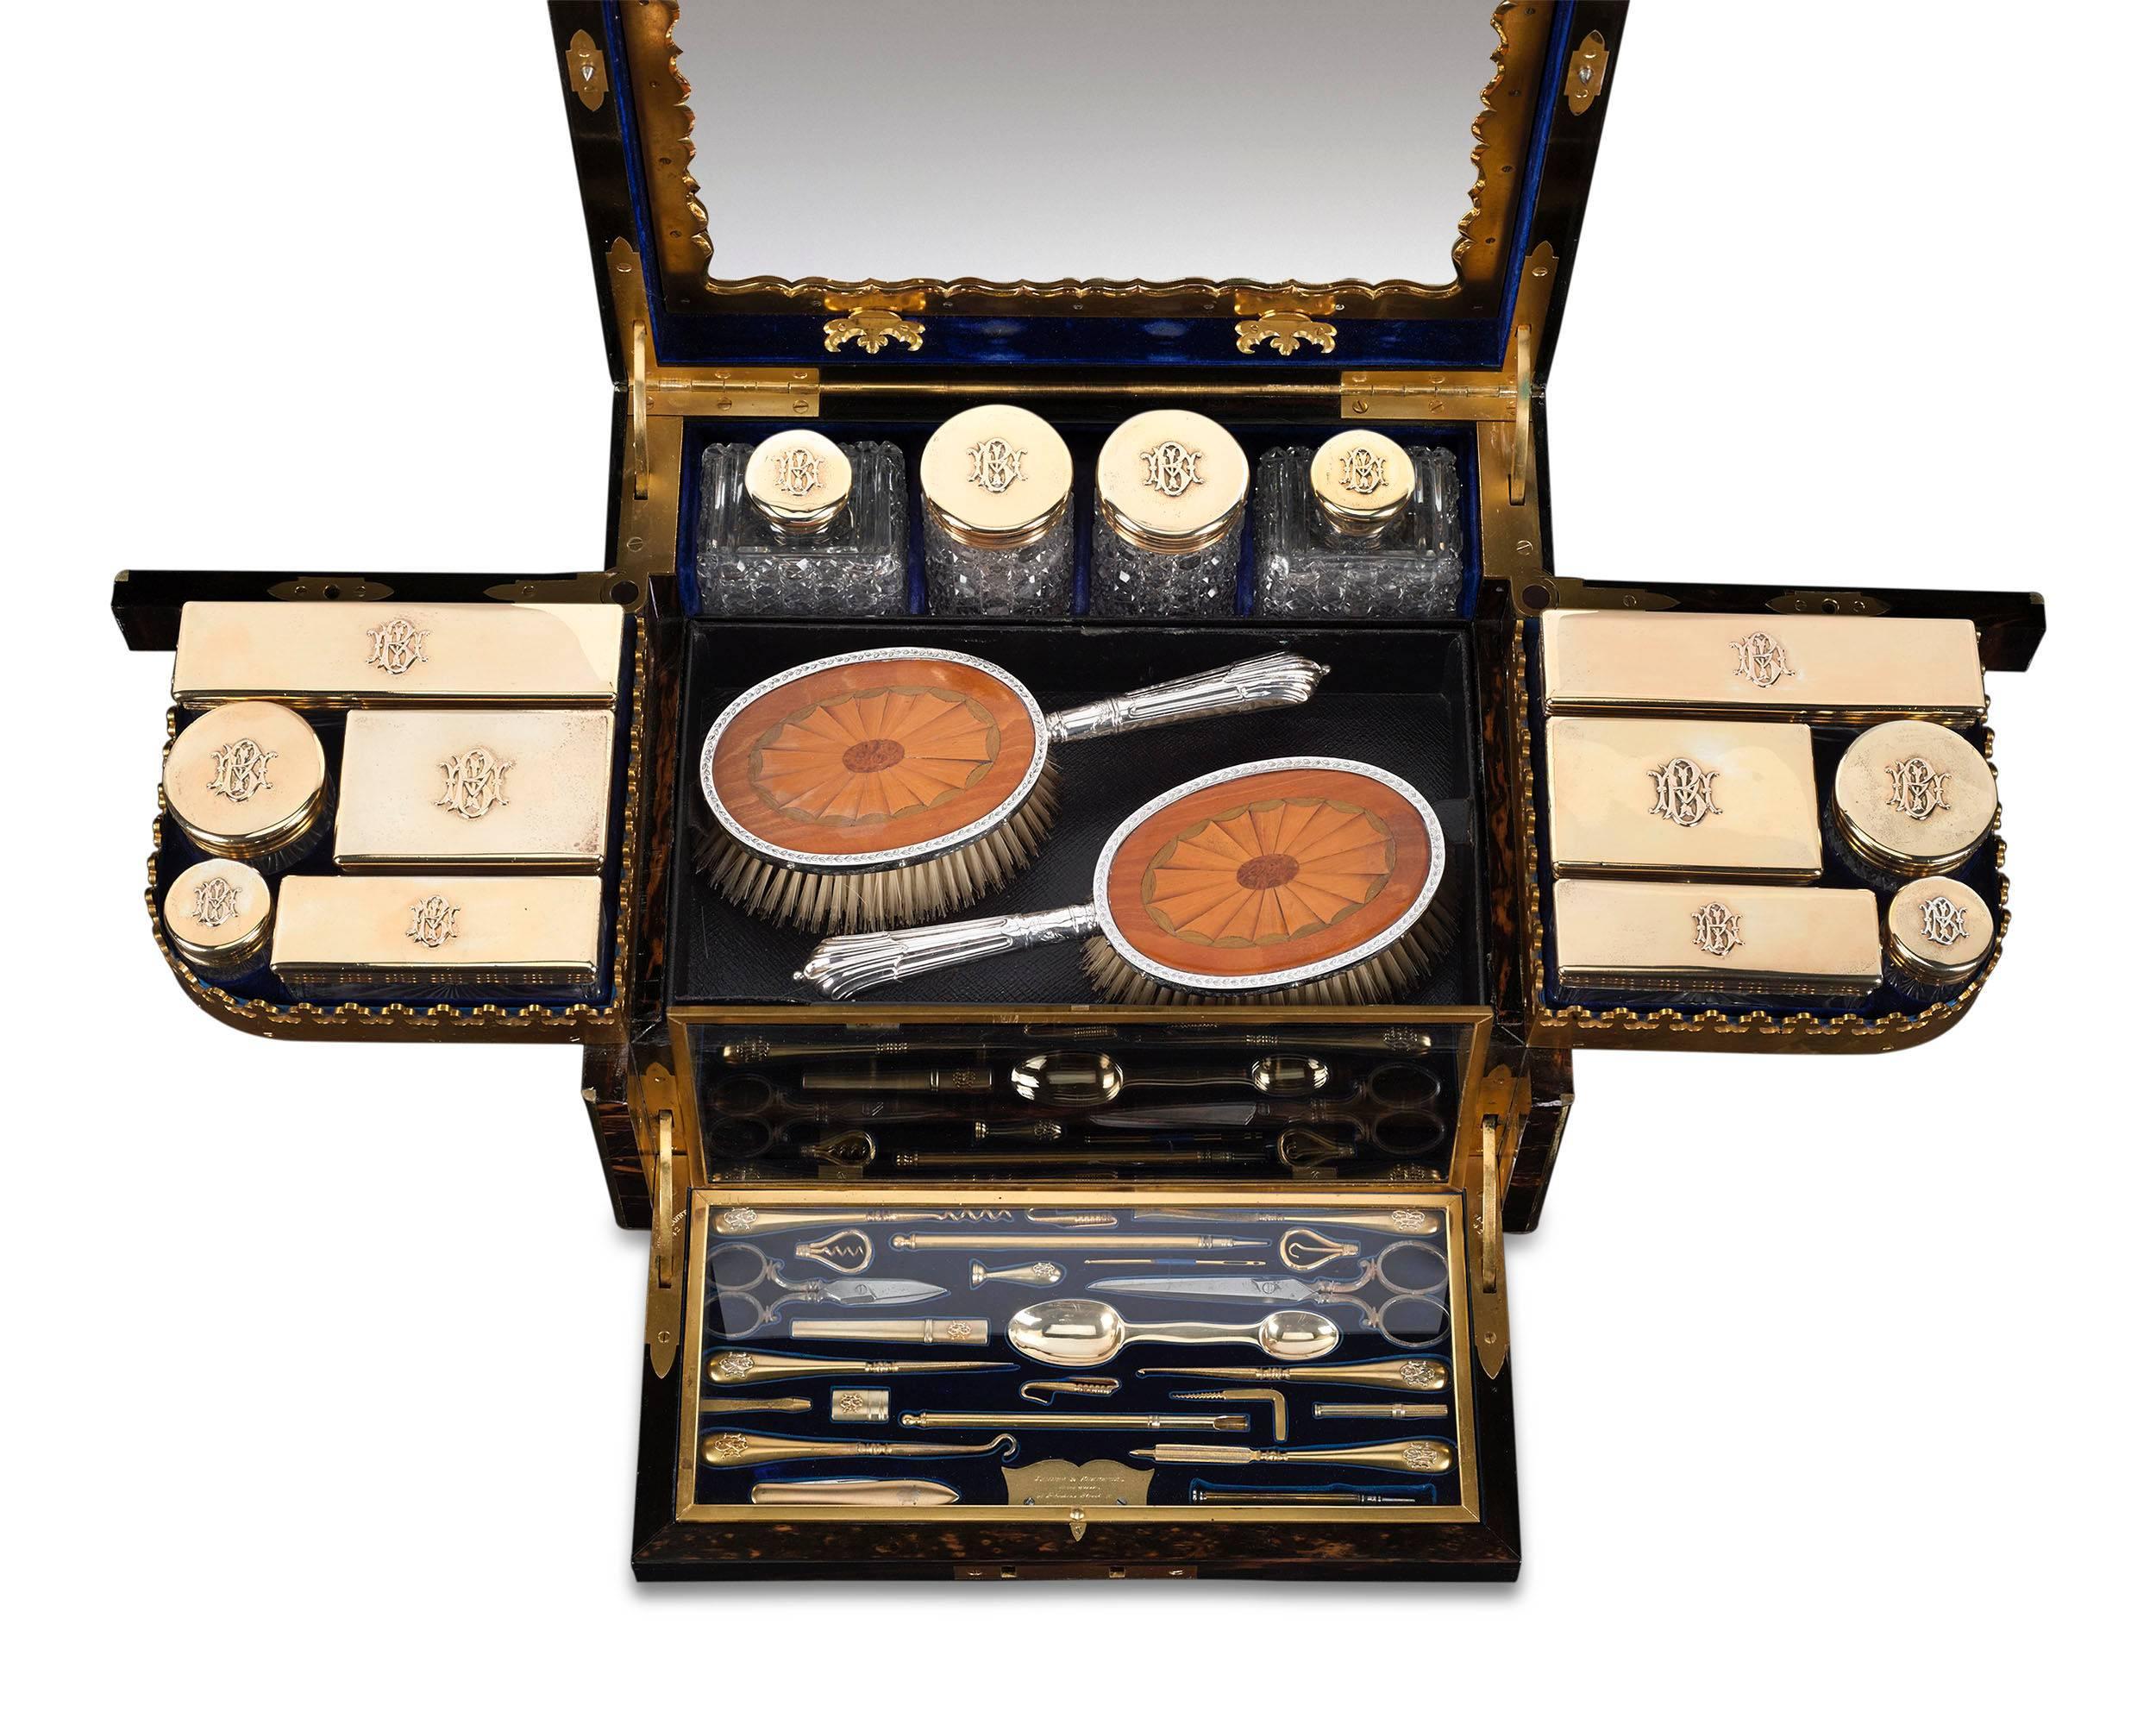 This phenomenal English coromandel nécessaire de voyage, crafted by Jenner & Knewstub, is among the finest vanity sets ever created. The gilt interior, lined with luxurious blue velvet, contains an impressive array of personal accouterments, all